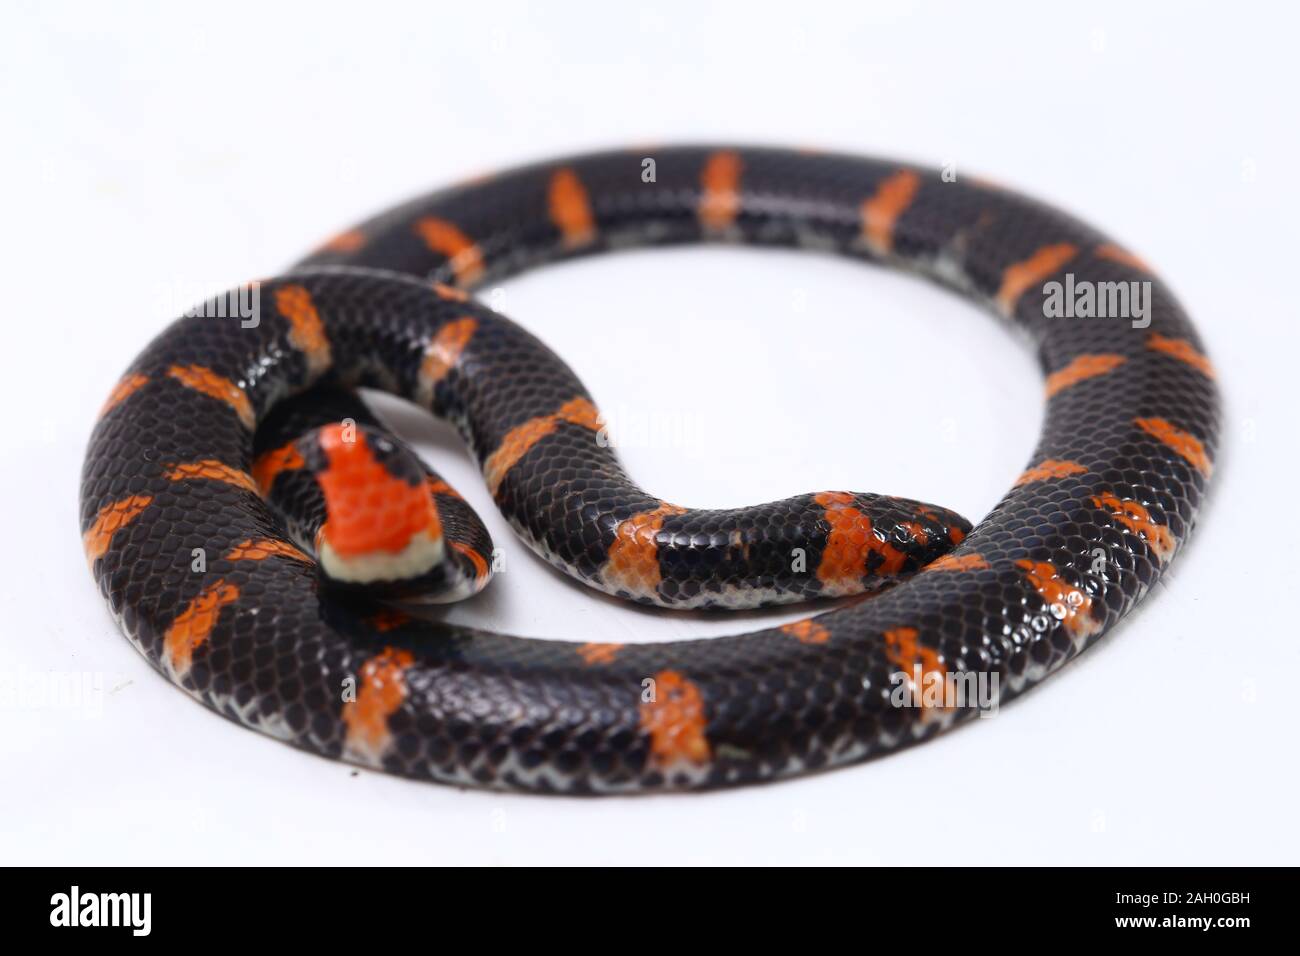 https://c8.alamy.com/comp/2AH0GBH/red-tailed-pipe-snake-scientific-name-cylindrophis-ruffus-isolate-on-white-background-2AH0GBH.jpg